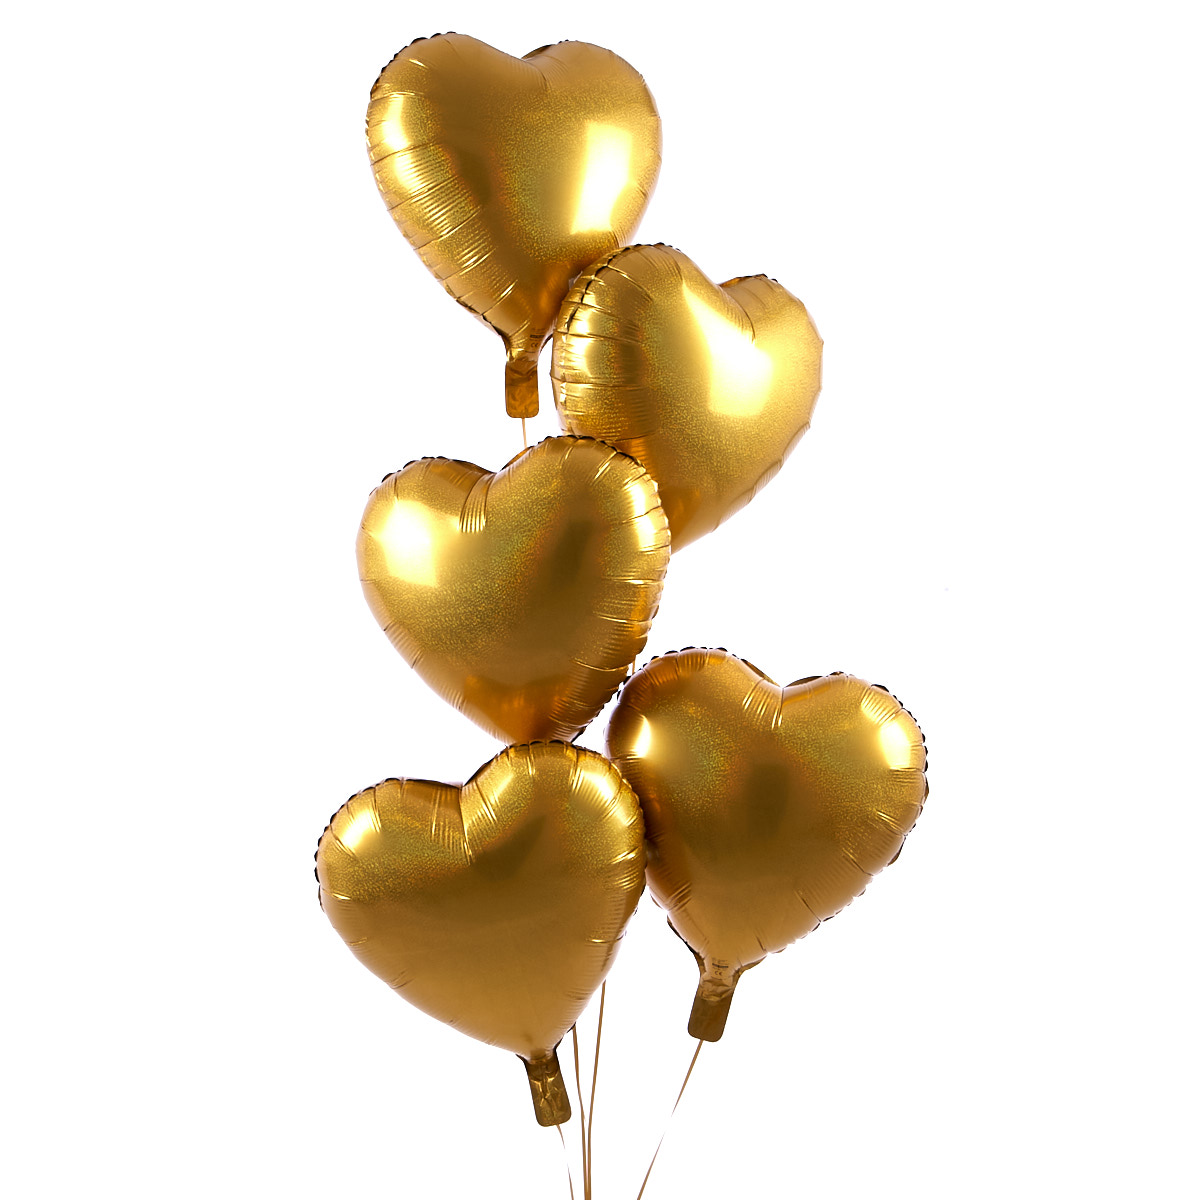 5 Gold Hearts Balloon Bouquet - DELIVERED INFLATED!